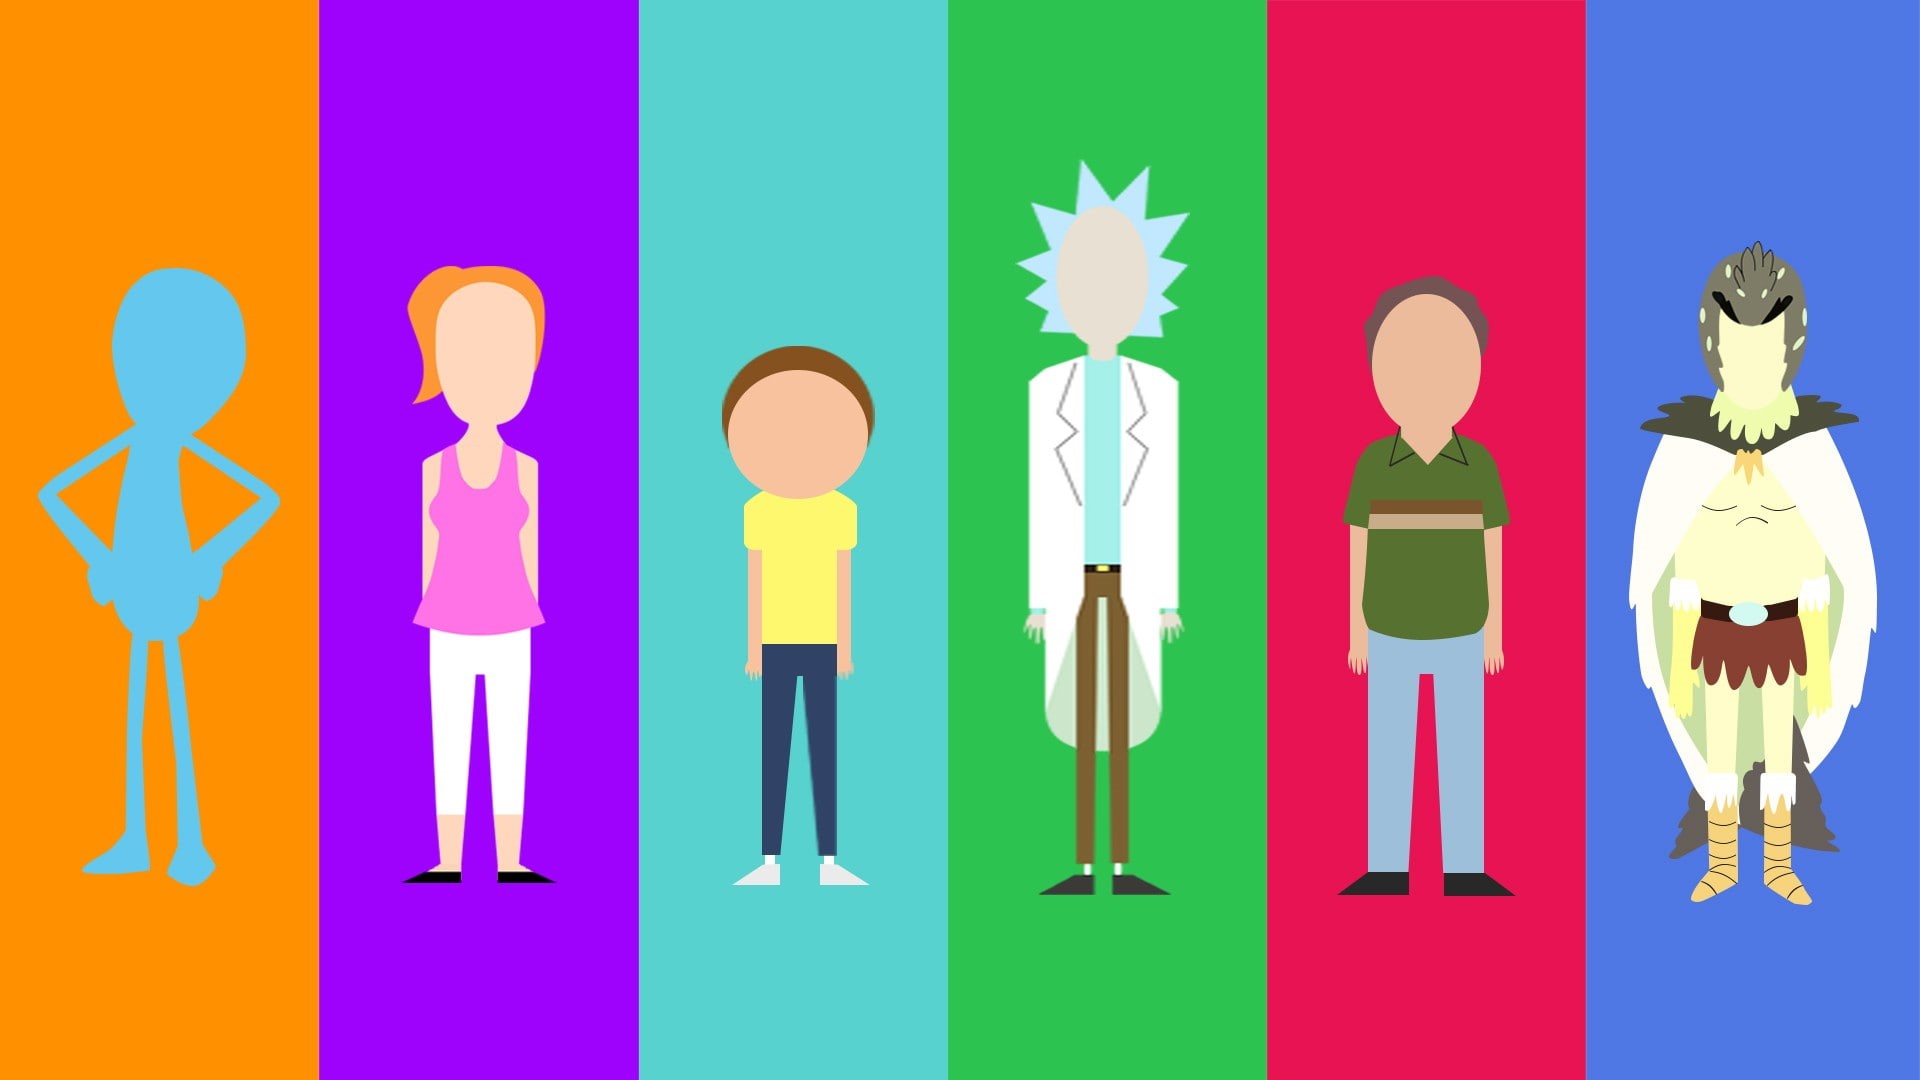 Wallpaper / Rick and Morty, minimalism, cartoon, Summer Smith, Rick Sanchez, Morty Smith, Jerry Smith, 1080P, Mr. Meeseeks, Bird Person free download